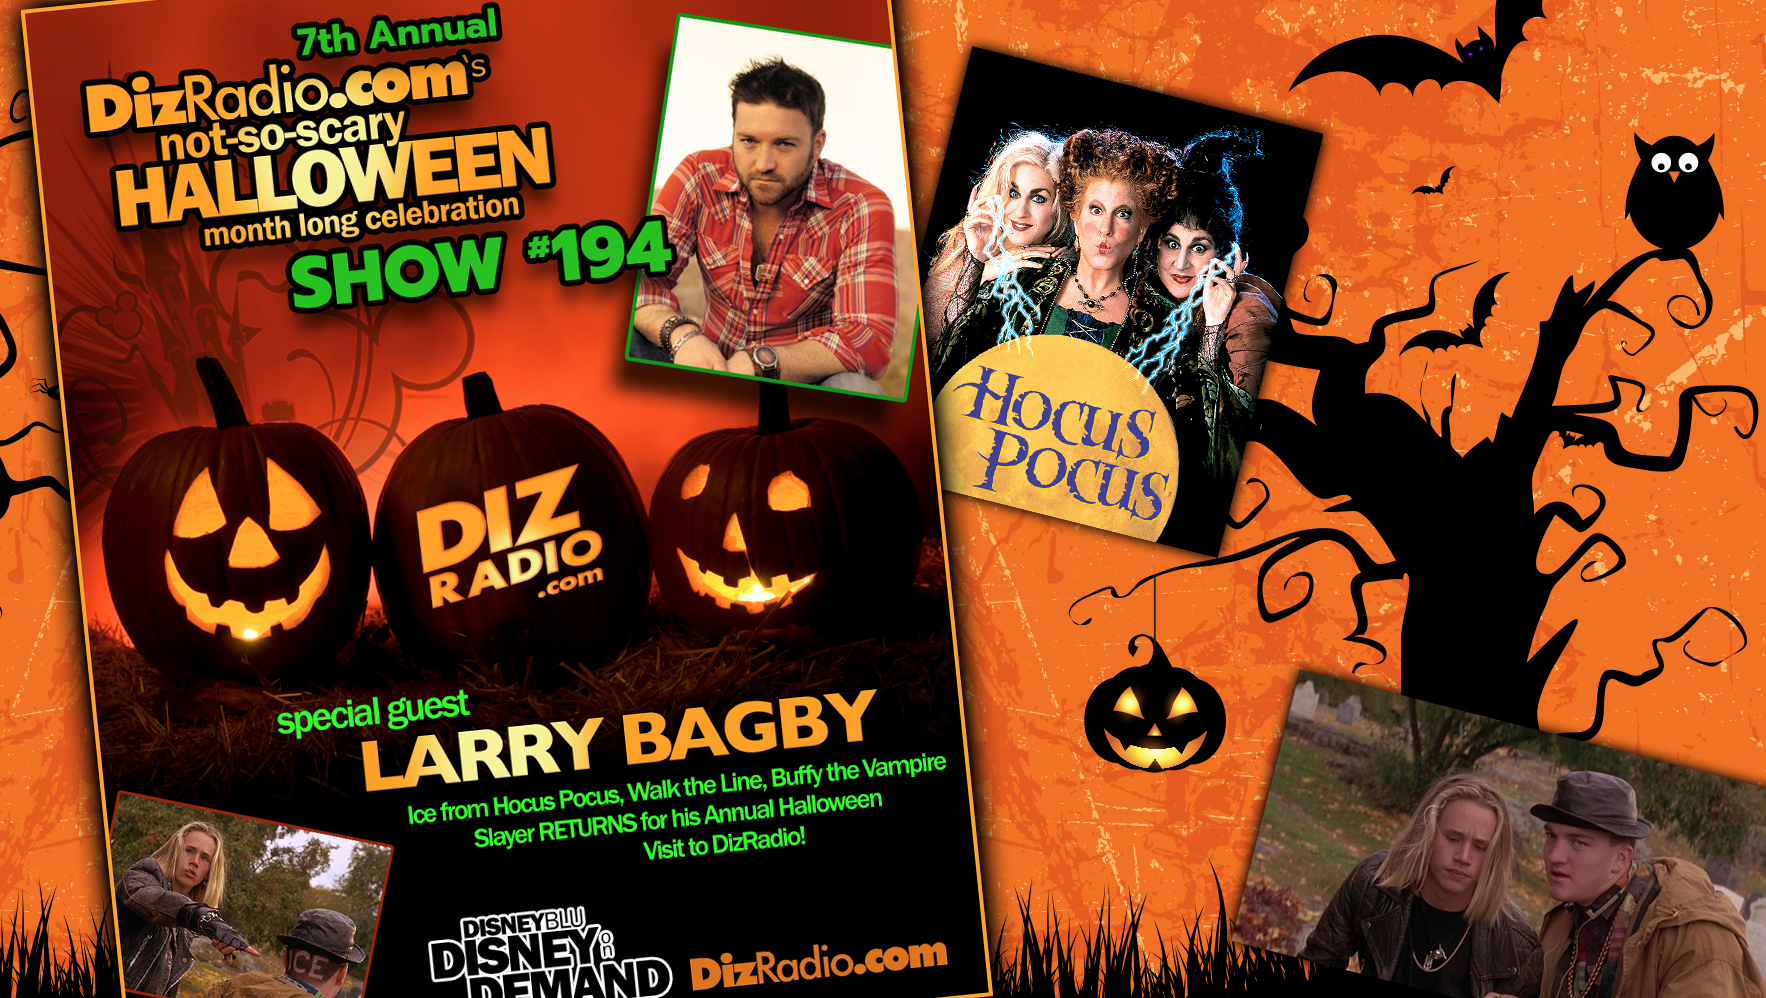 DisneyBlu's DizRadio Disney on Demand Podcast Show #194 w/ Special Guest LARRY BAGBY (Ice in Hocus Pocus, Walk the Line, Buffy the Vampire Slayer, Musician)